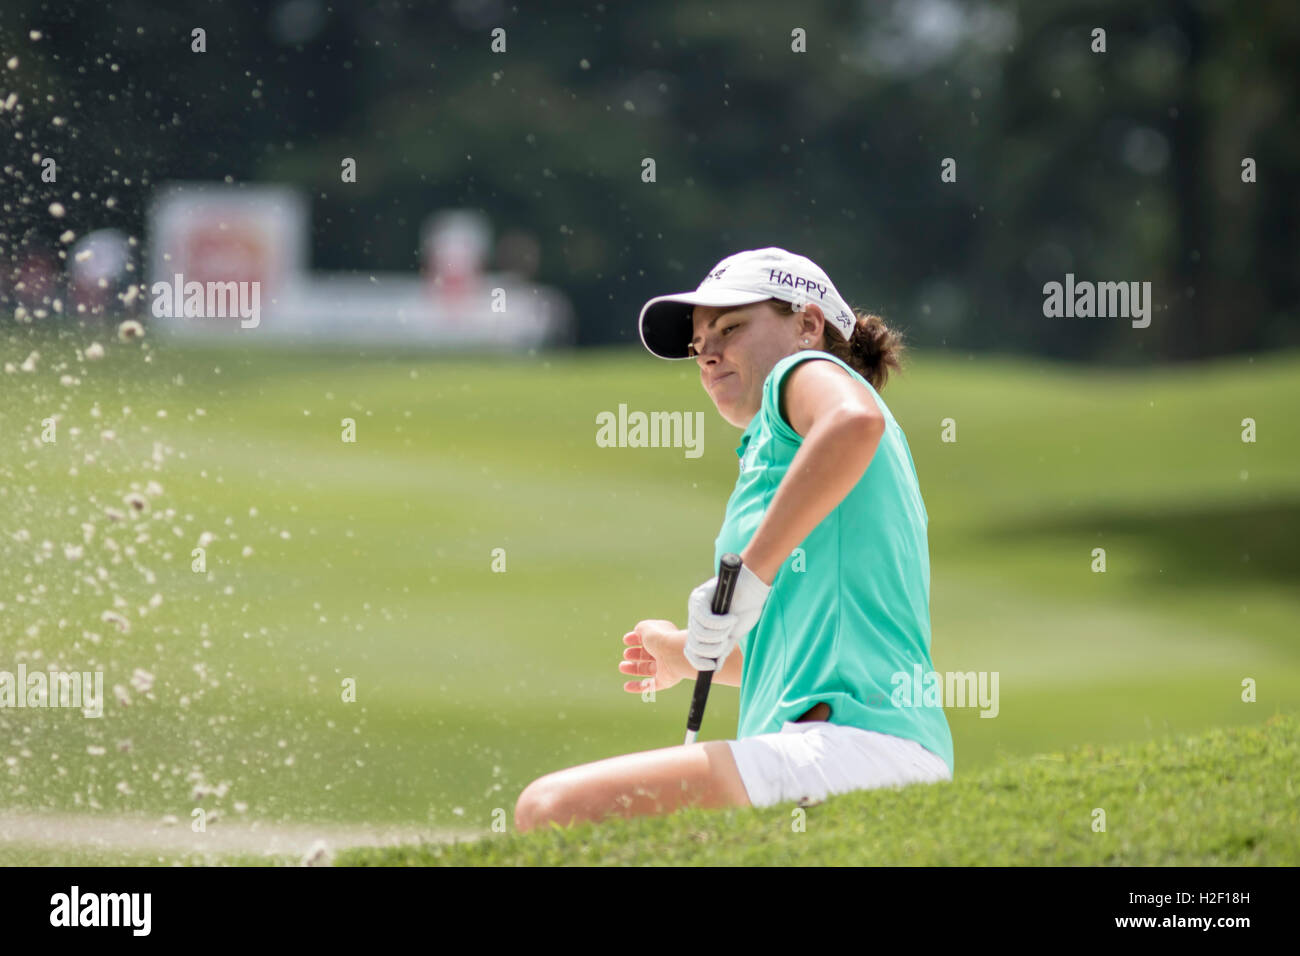 Kuala Lumpur, Malaysia. 28th Oct, 2016. Beatriz Recari landed her shot on the side of hilly green bunker. A good effort to hit the ball out from the bunker to the green. Credit:  Danny Chan/Alamy Live News. Stock Photo